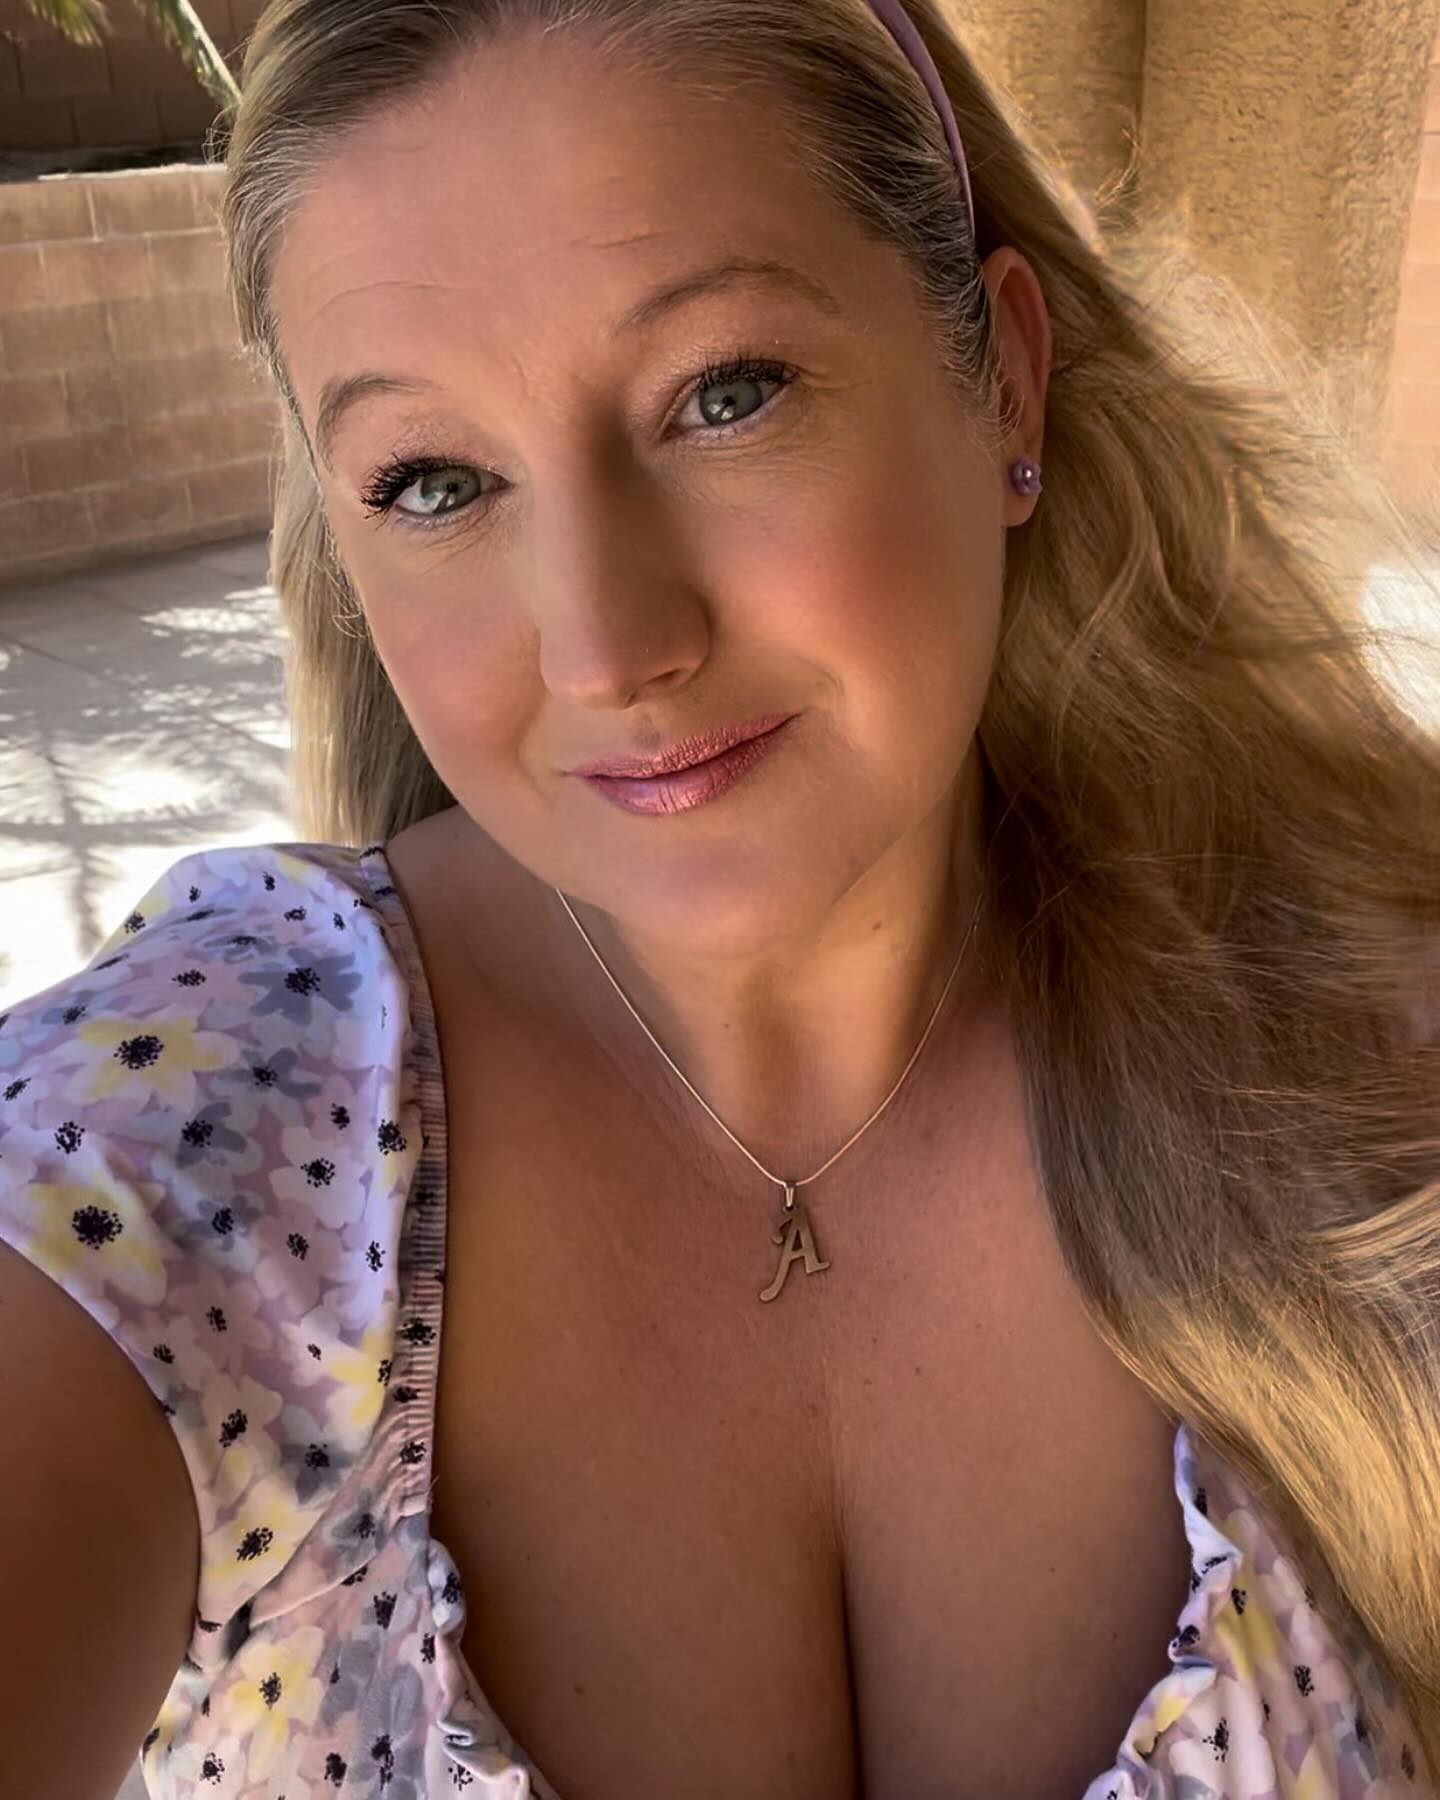 😊👗🌸 I am happy it is sundress season 😊👗🌸

How about you?